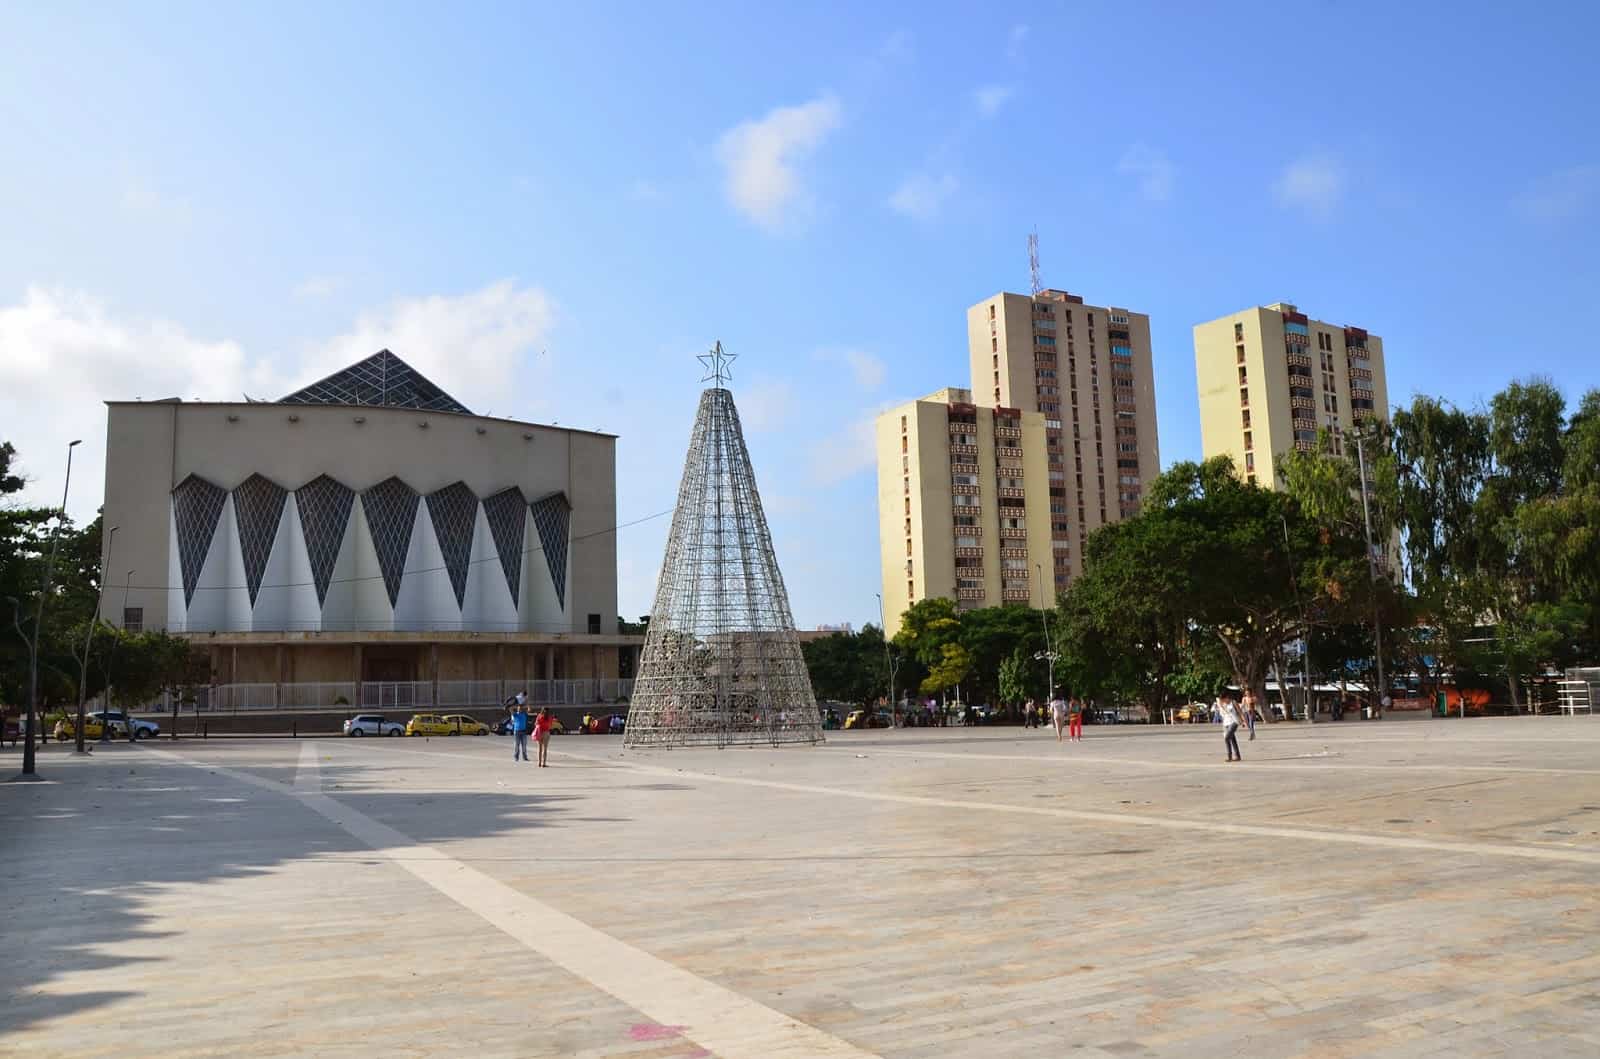 Plaza of Peace and the Metropolitan Cathedral in Barranquilla, Atlántico, Colombia